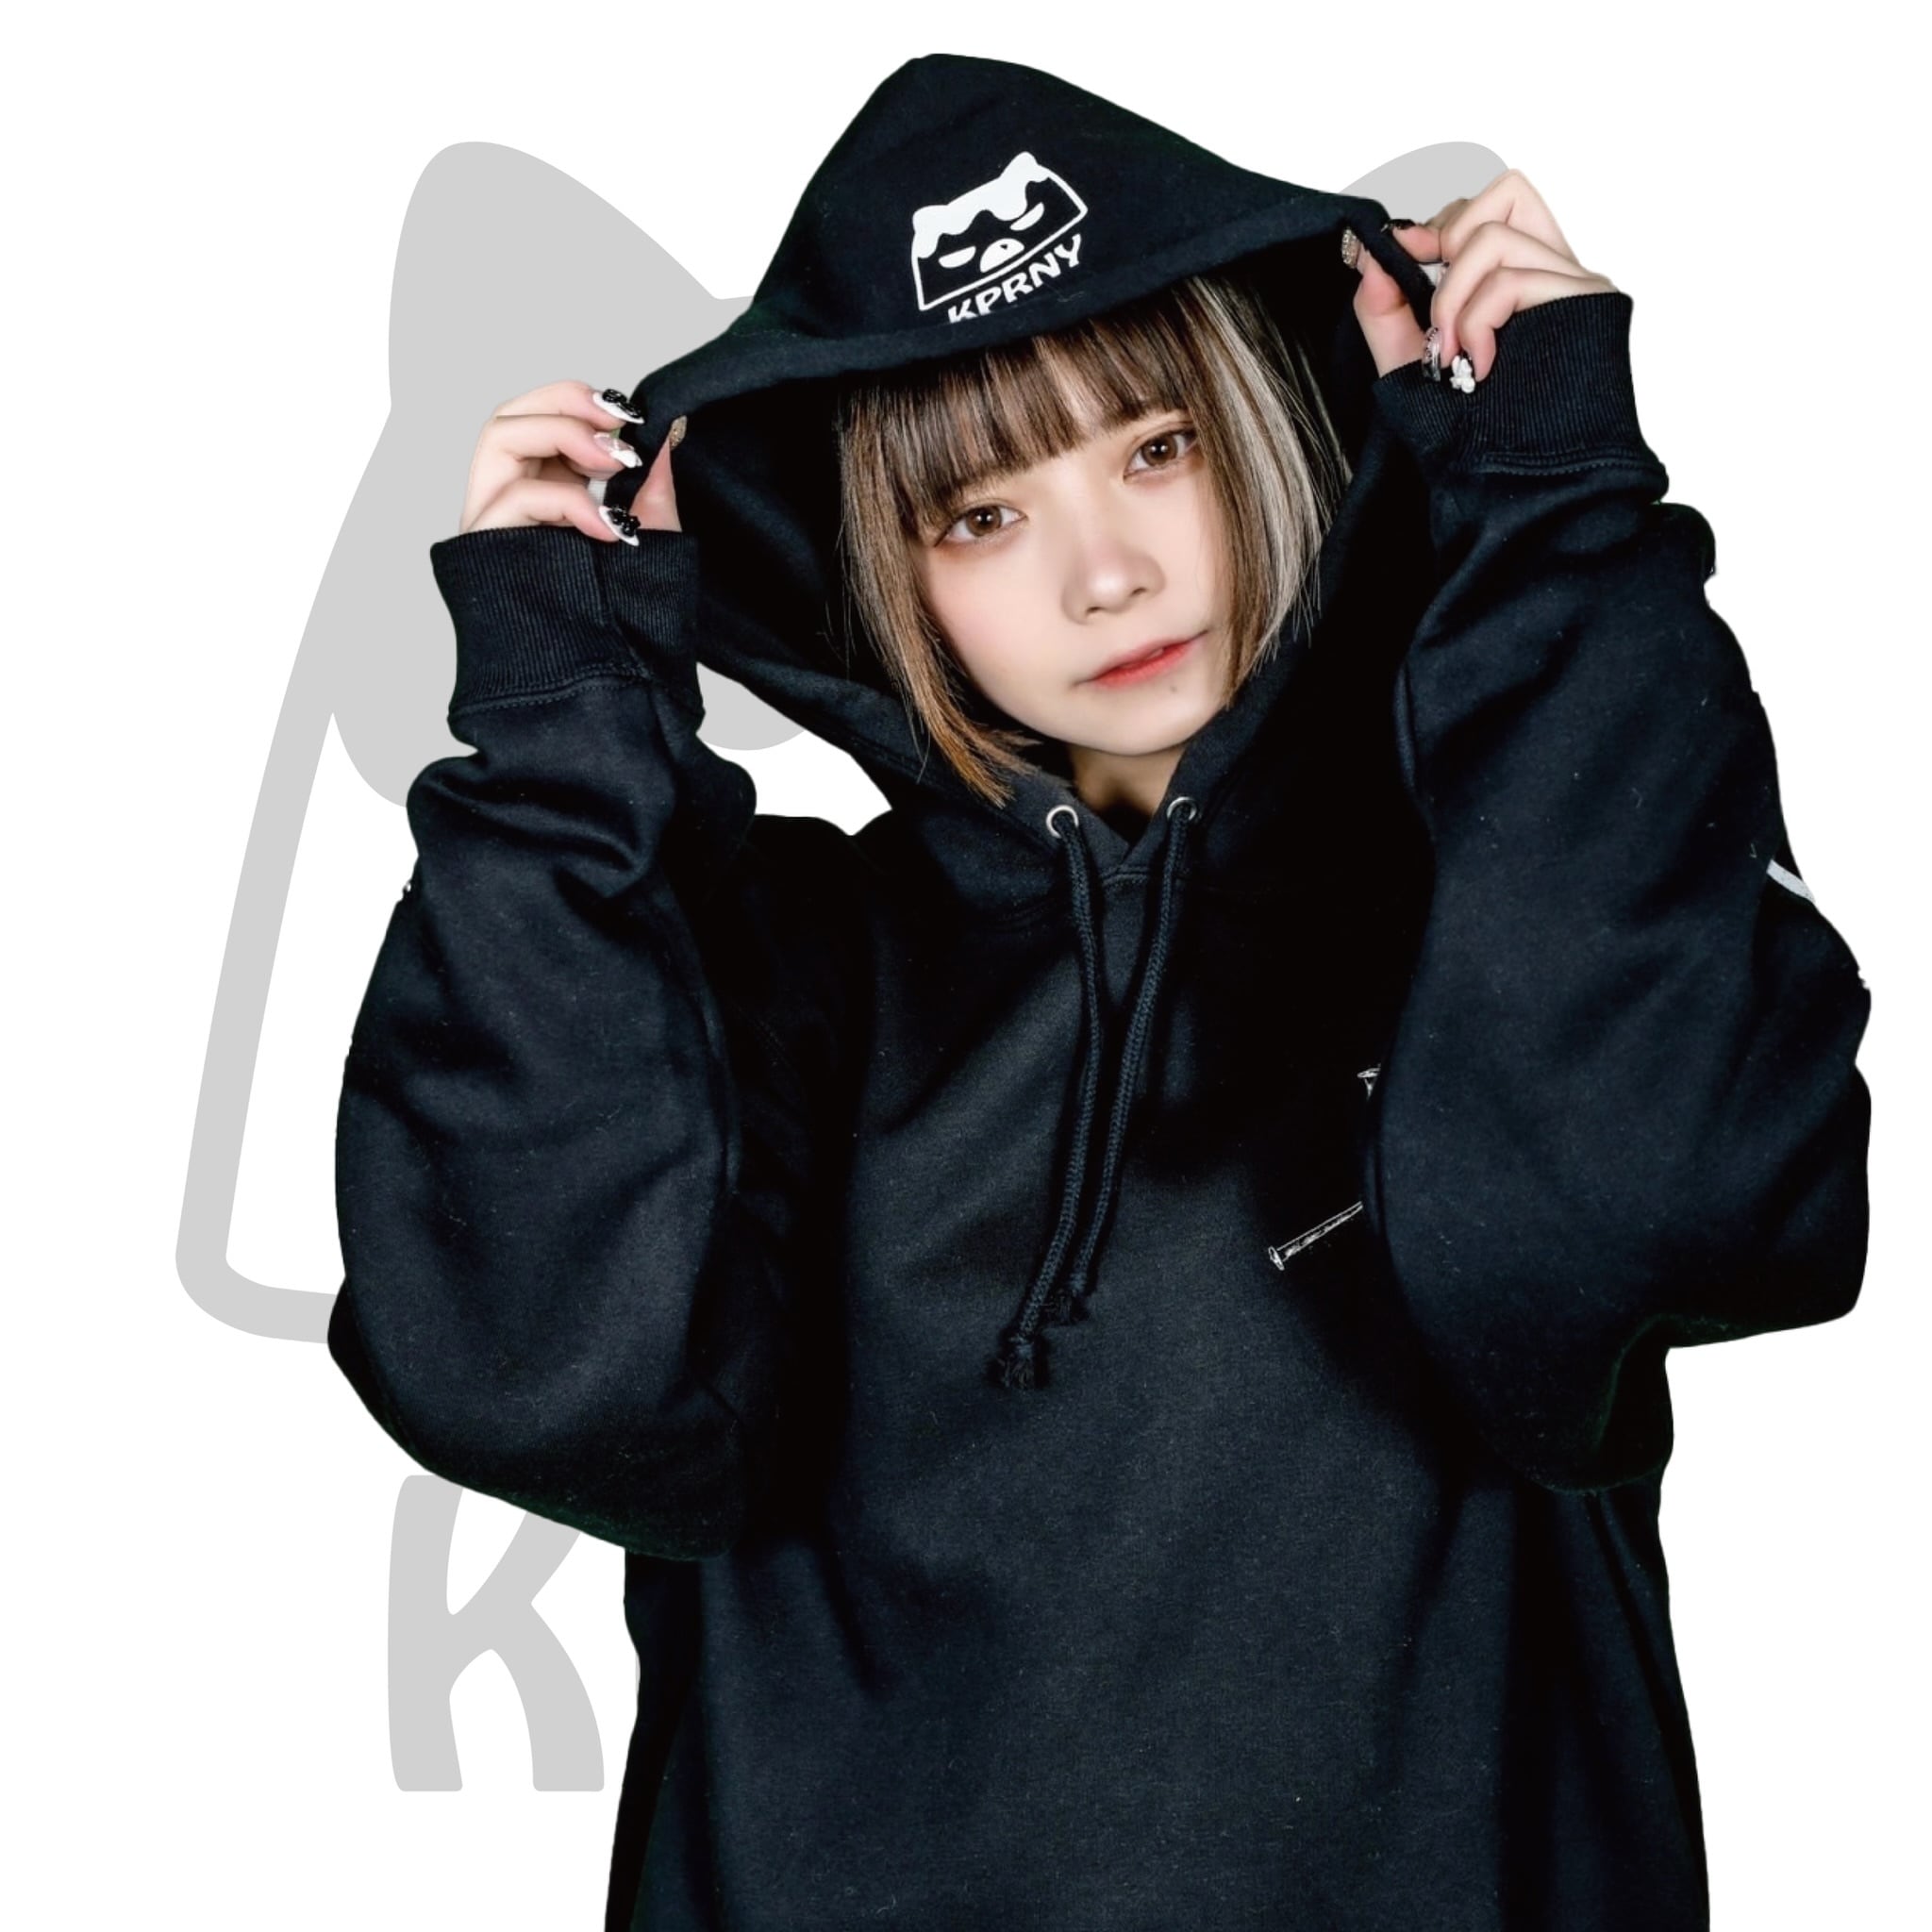 「KPRNY8パーカ」 | KRY clothing powered by BASE